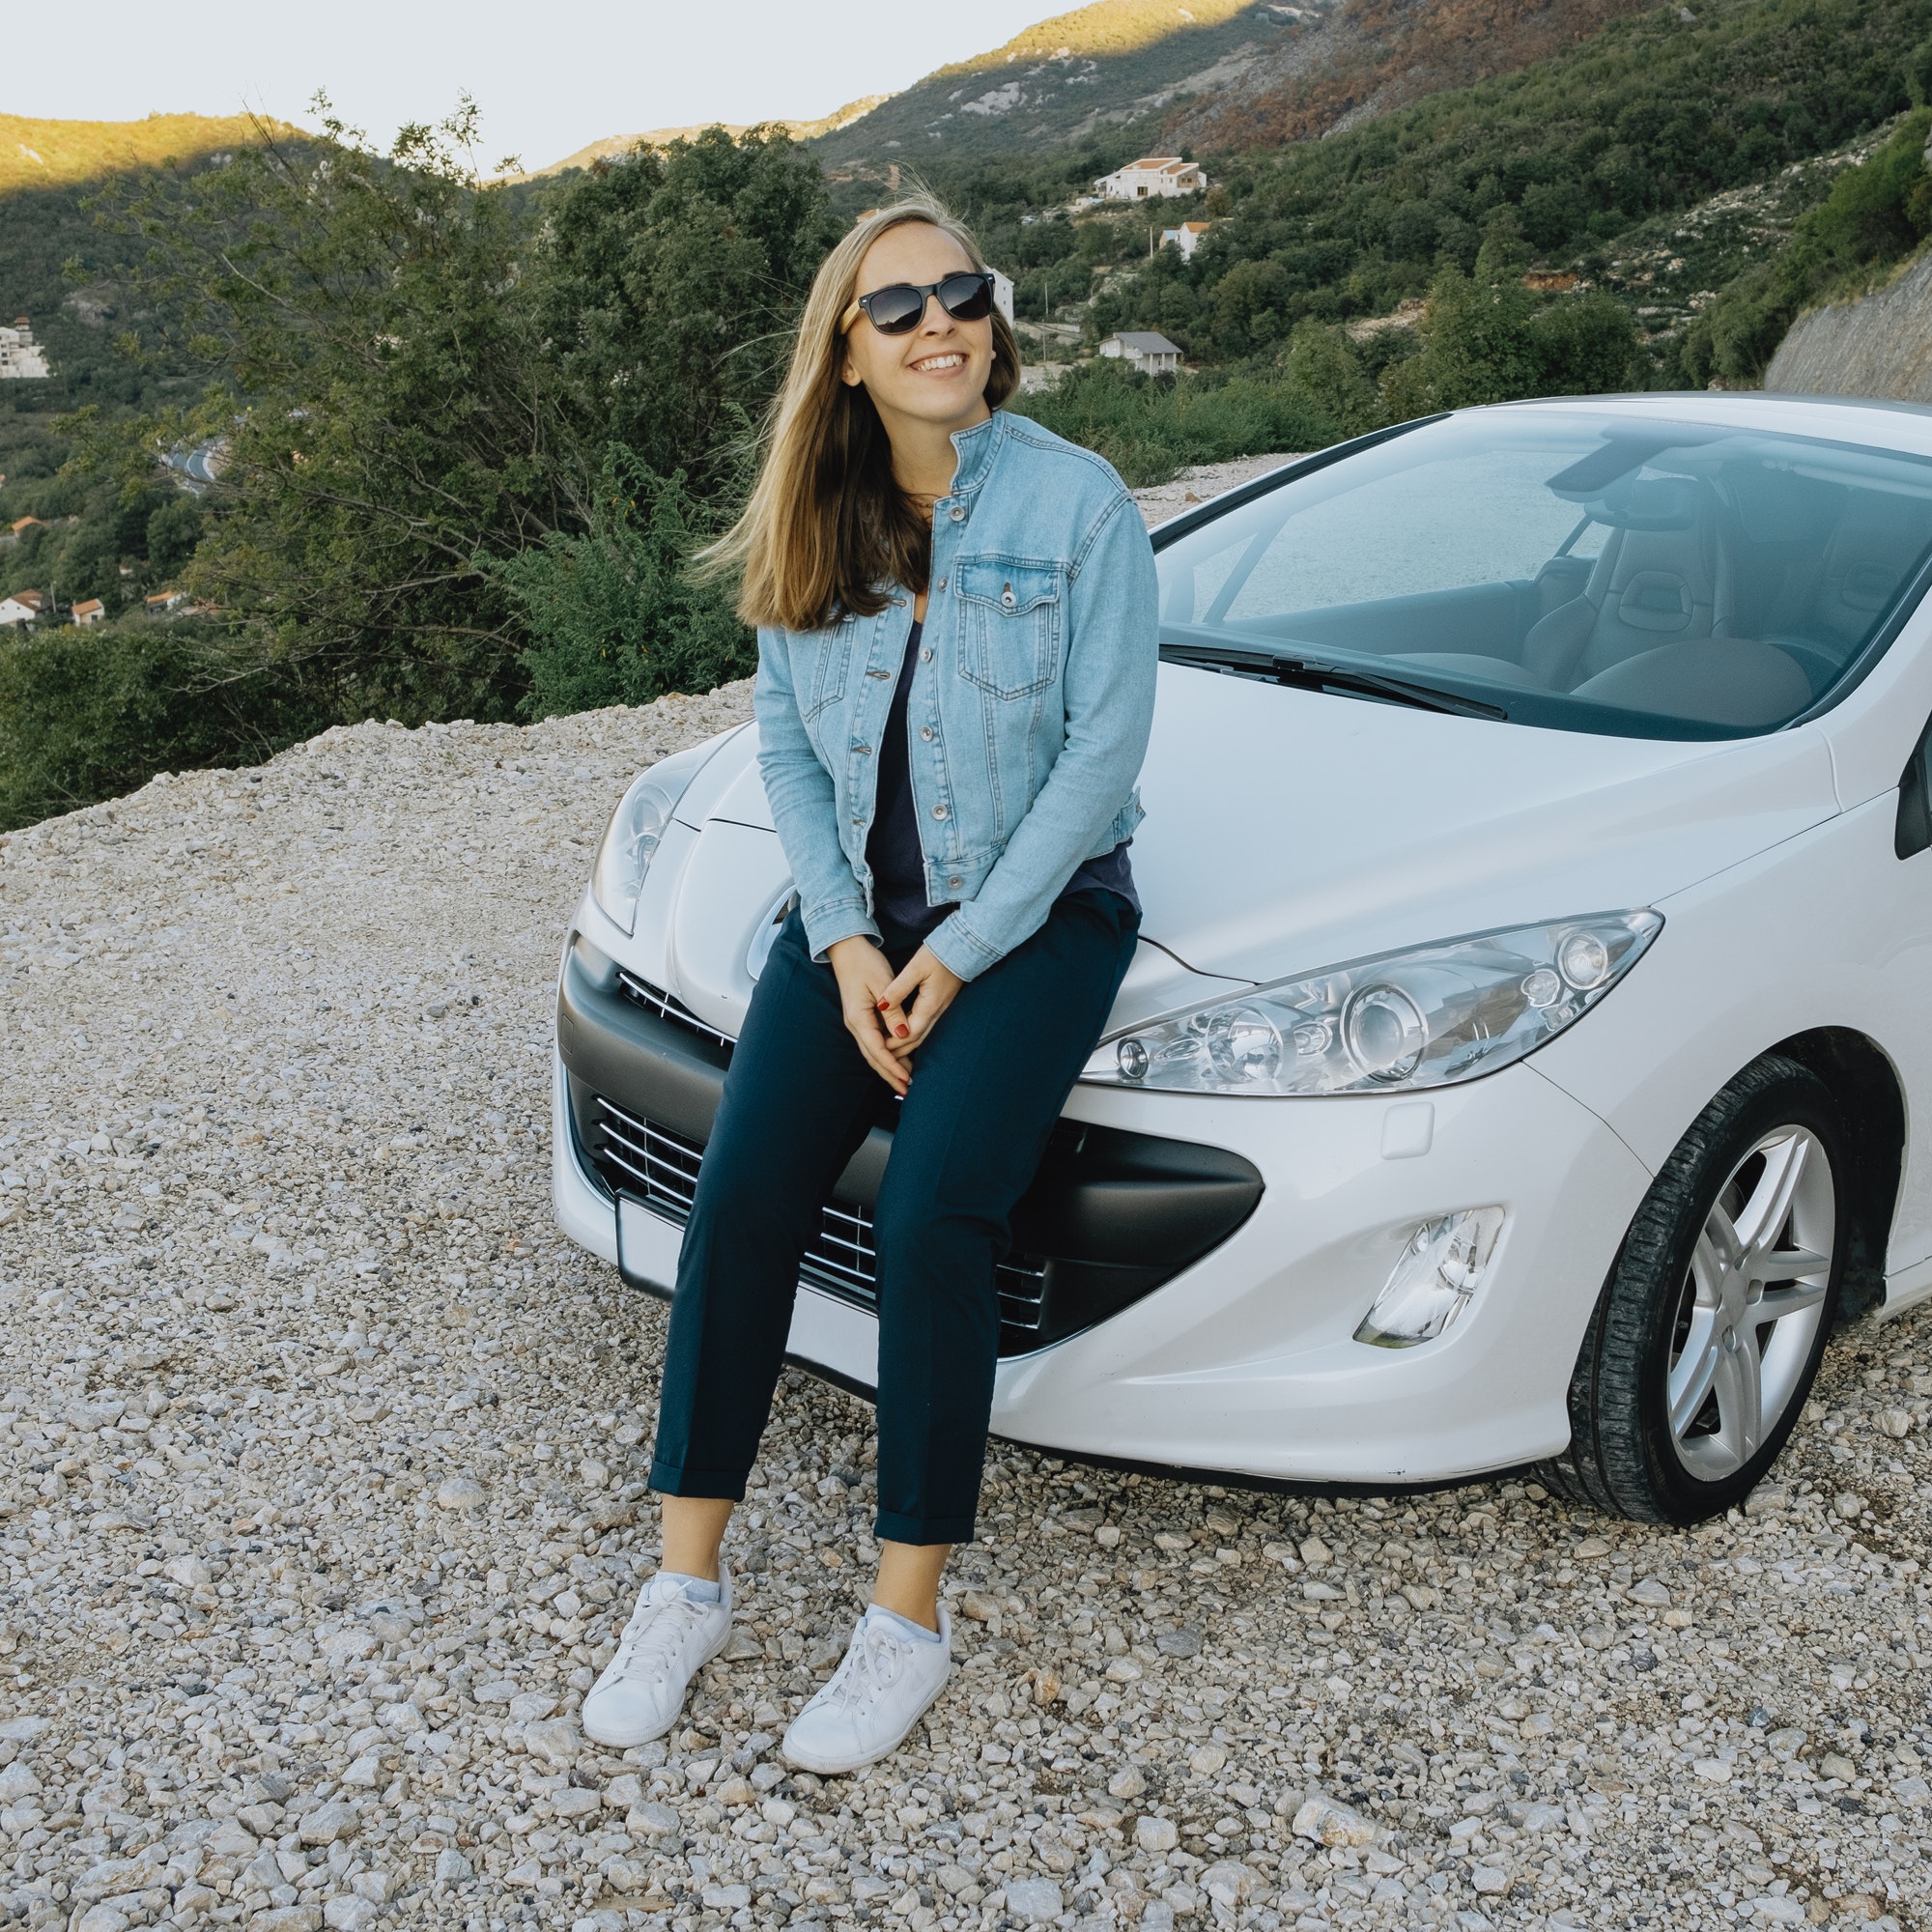 Smiling woman in sunglasses sitting near a car